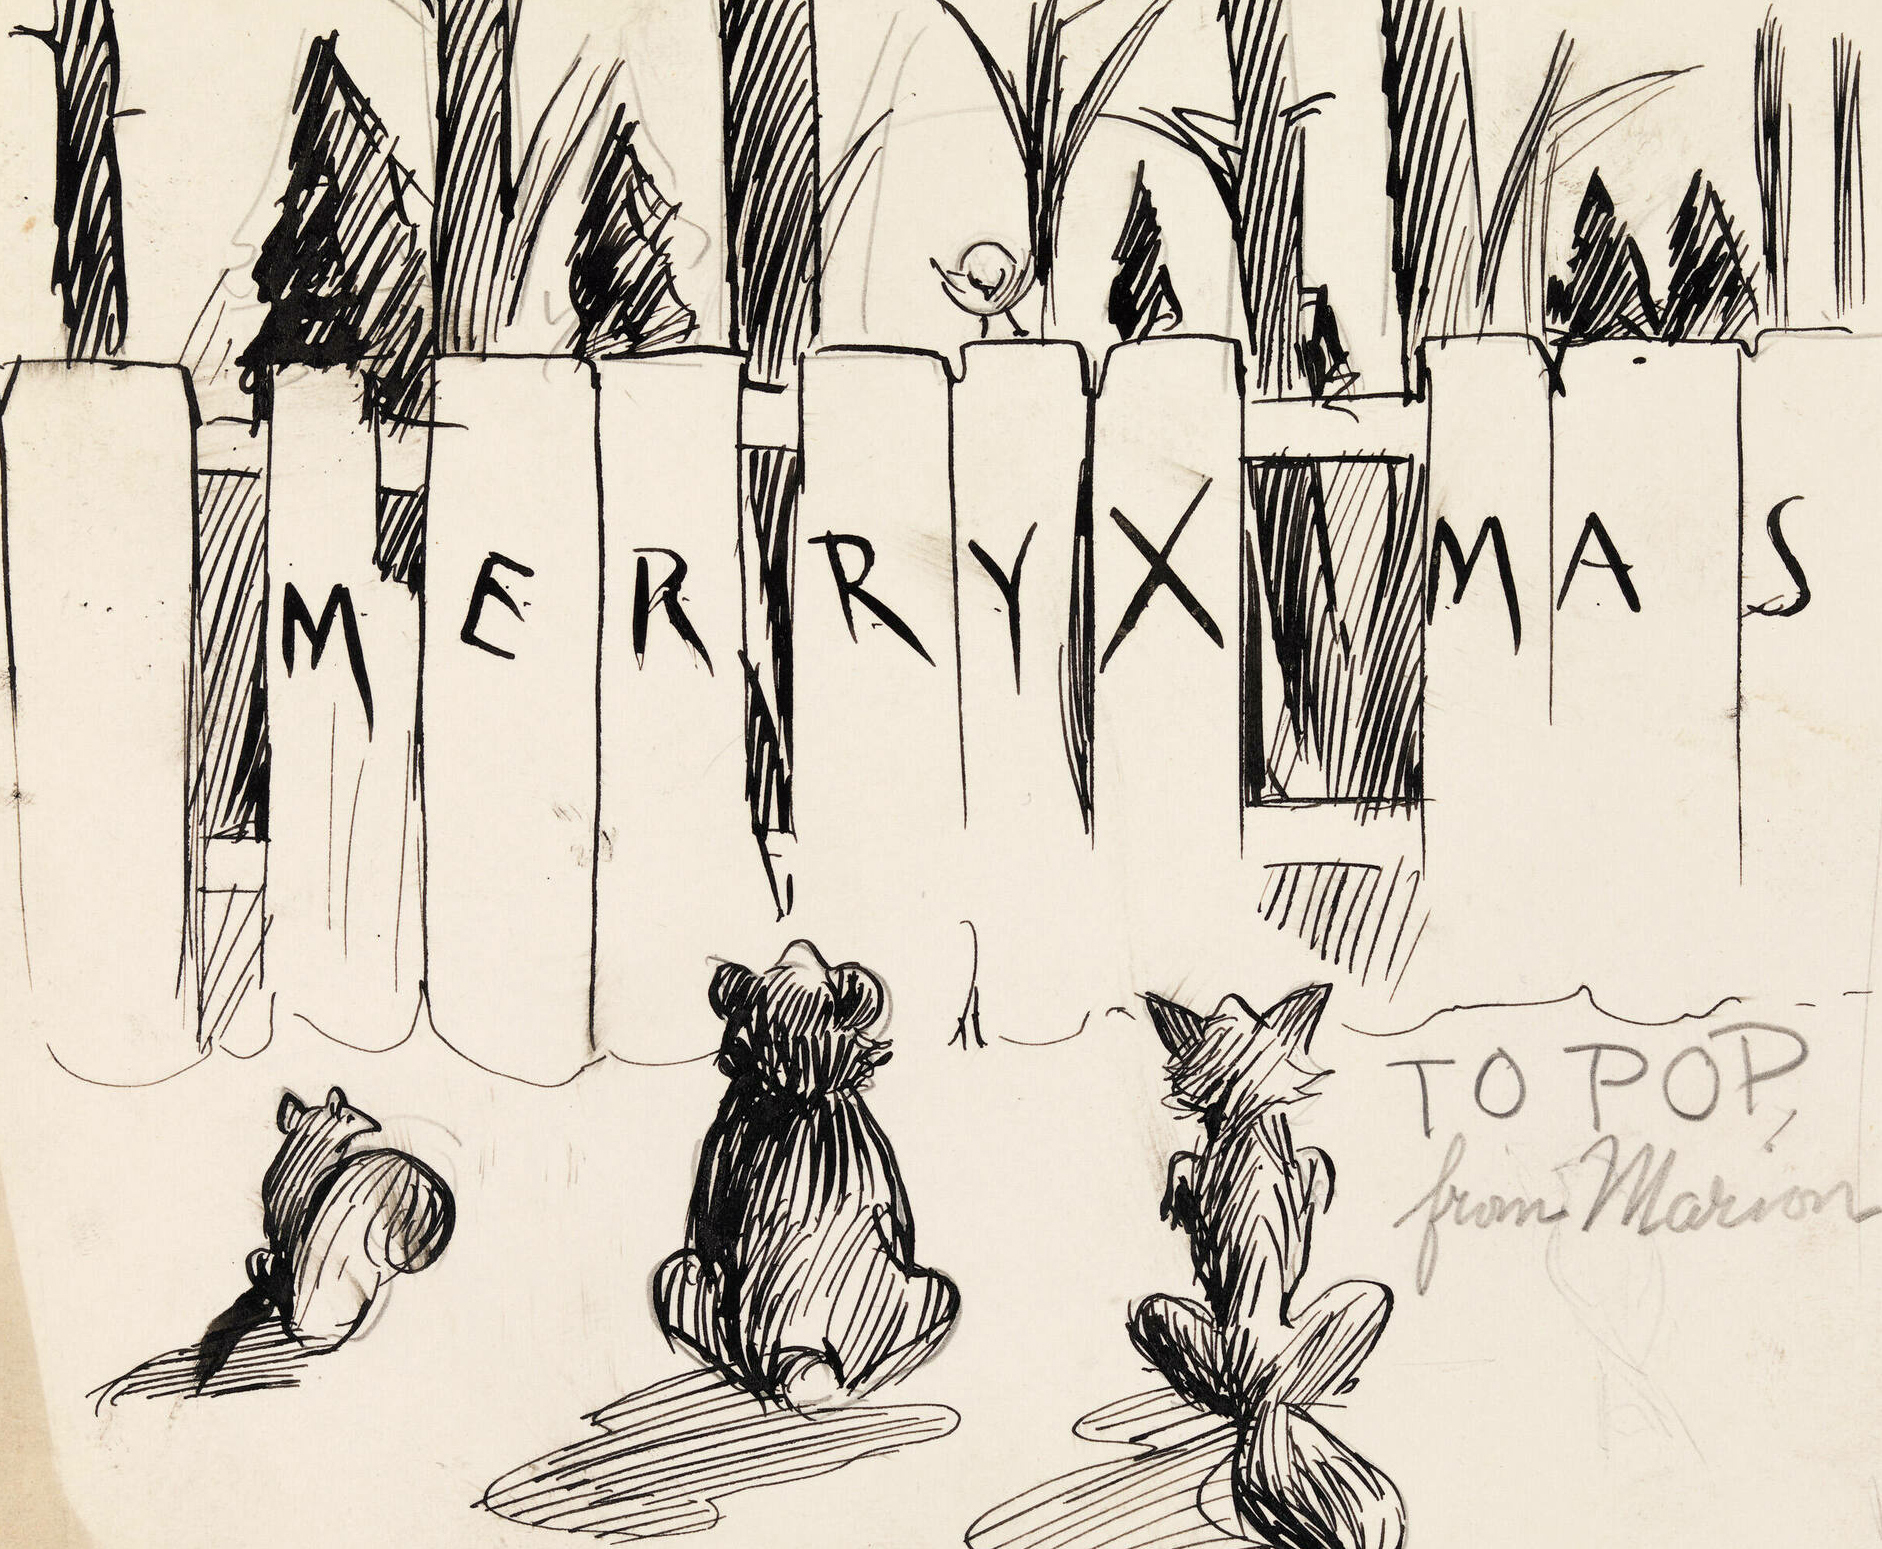 Ink drawing on paper of animals looking at a fence that says Merry Xmas.